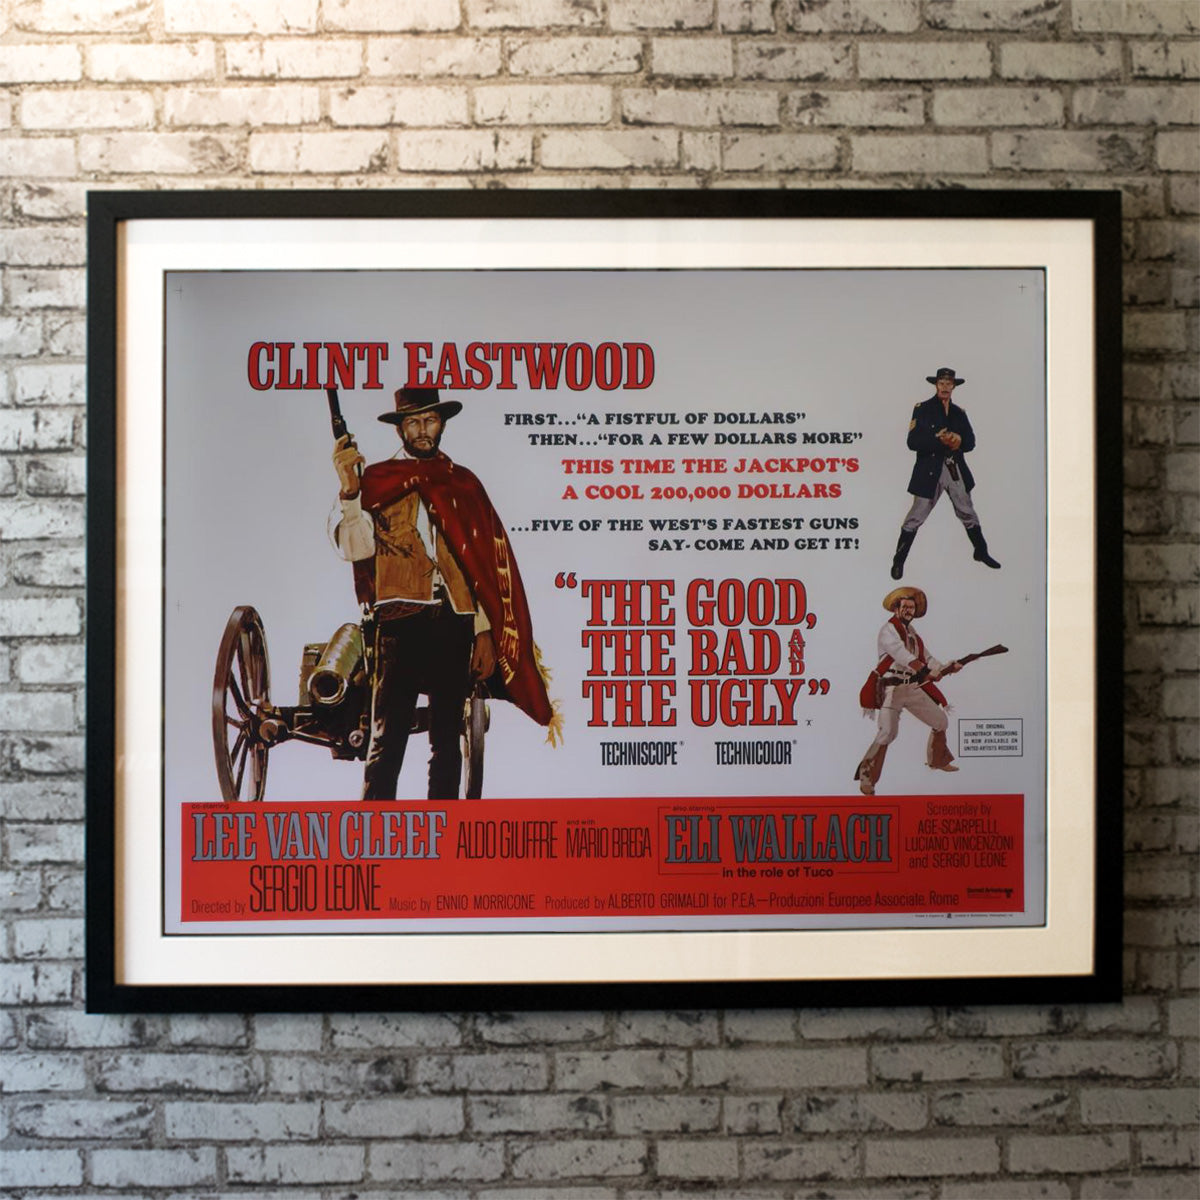 Good, The Bad And The Ugly, The (1966)